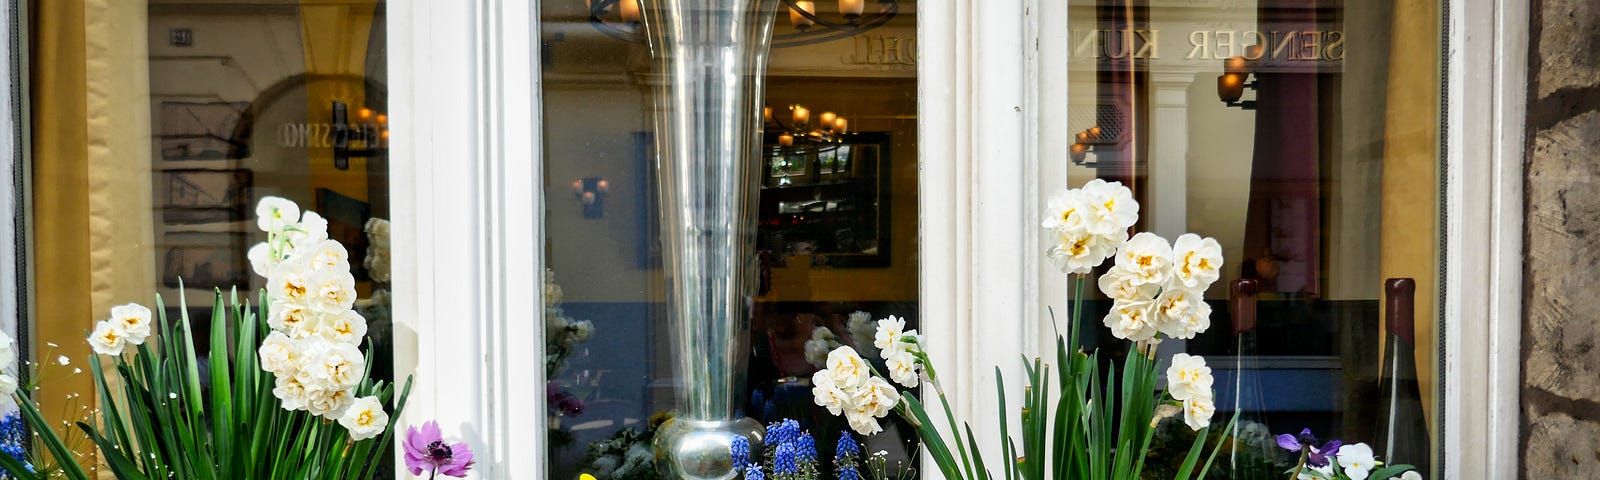 A window in front of a small shop in Germany with a window box full of blooming flowers. You can see a tall glass vase in the window and furnishings in the room.